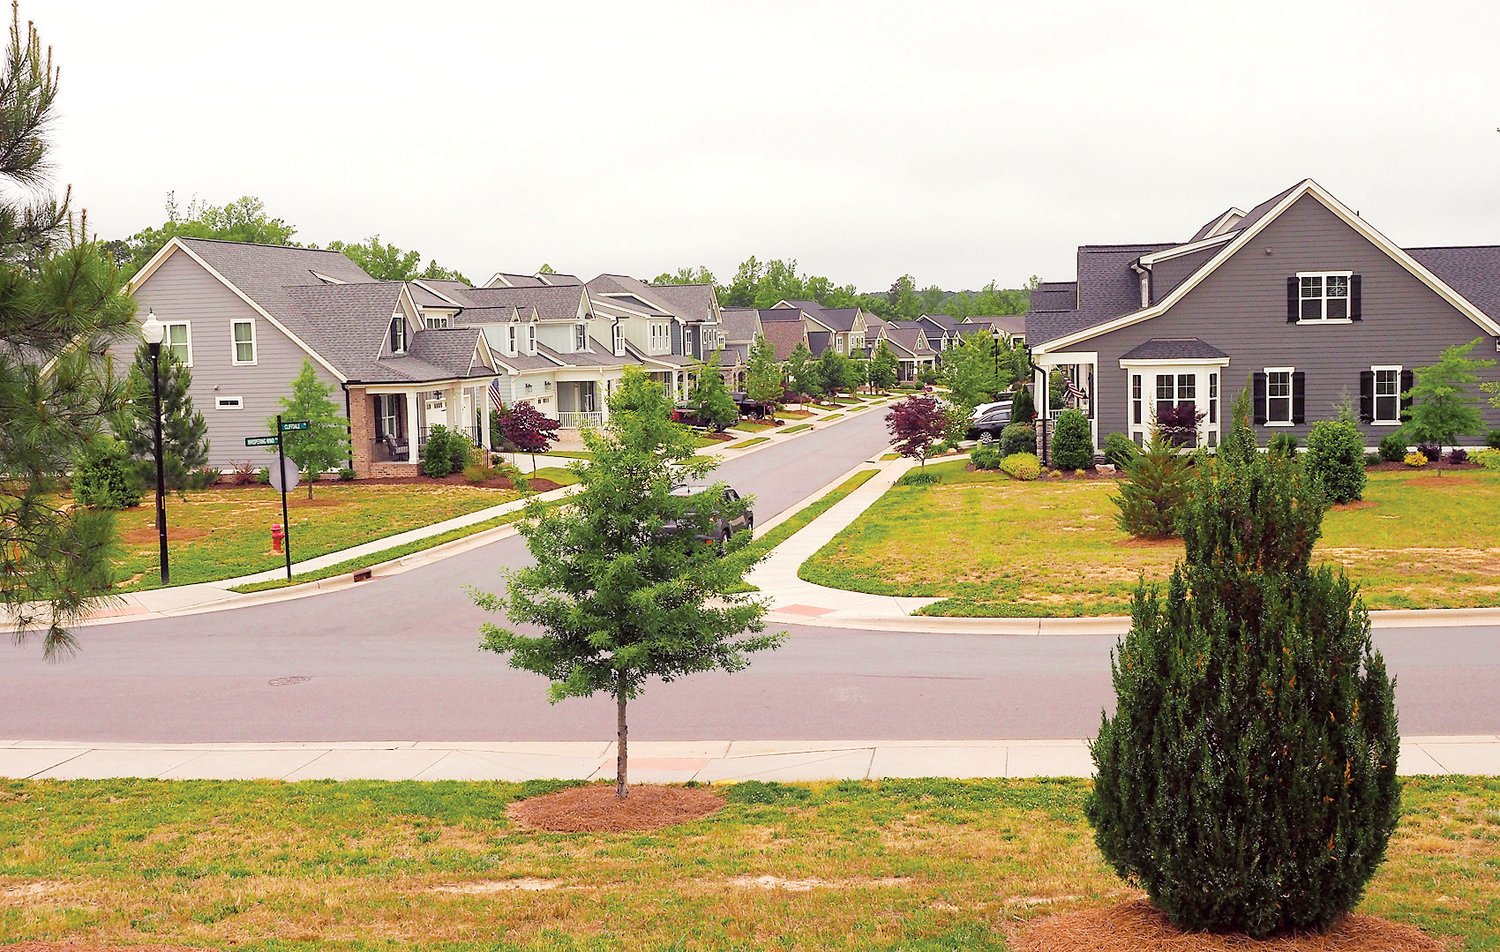 Homes at the intersection of Whispering Wind Drive and Cliffdale Road sit directly across from the neighborhood's privately operated wastewater treatment plant.